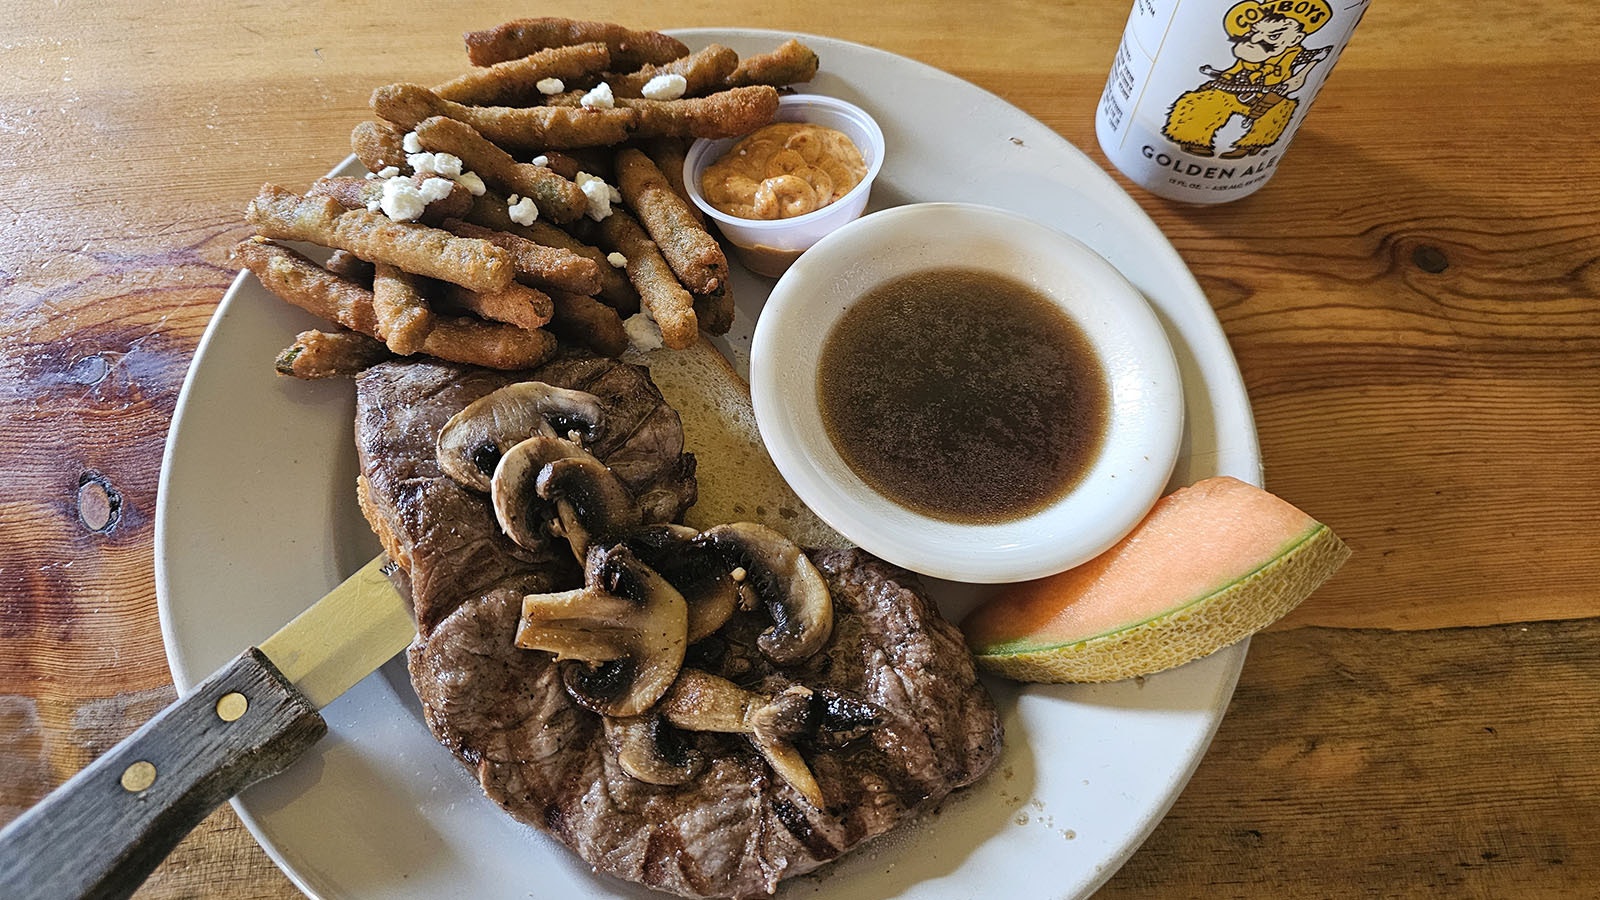 The prime rib steak sandwich at The Emporium, along with a can of Wyoming brewed Cowboy beer.